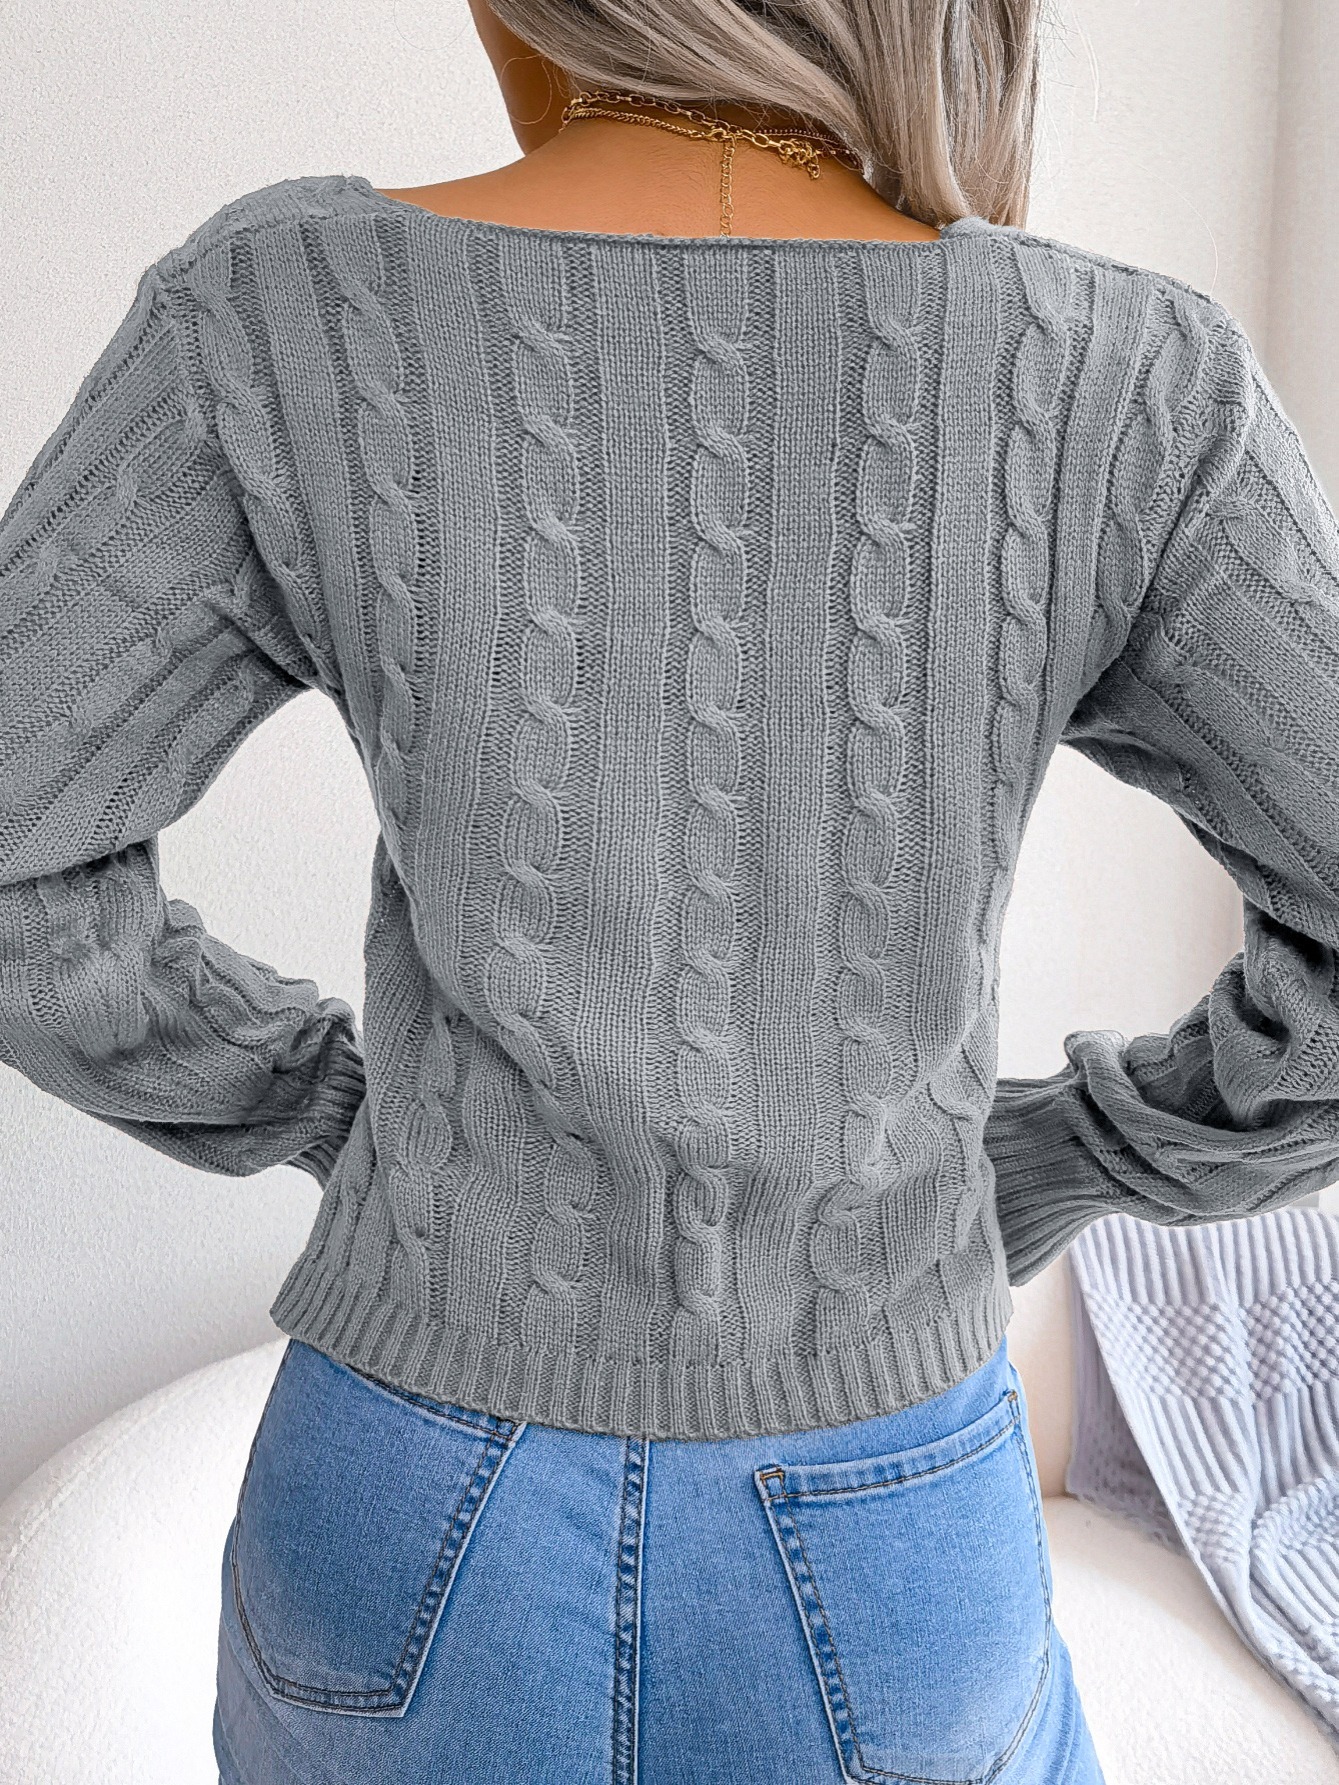 XFLWAM Womens V Neck Criss Cross Wrap Sweaters Halter Long Sleeve Knitted  Tops Slim Fitted Solid Color Choker Blouse Beige M